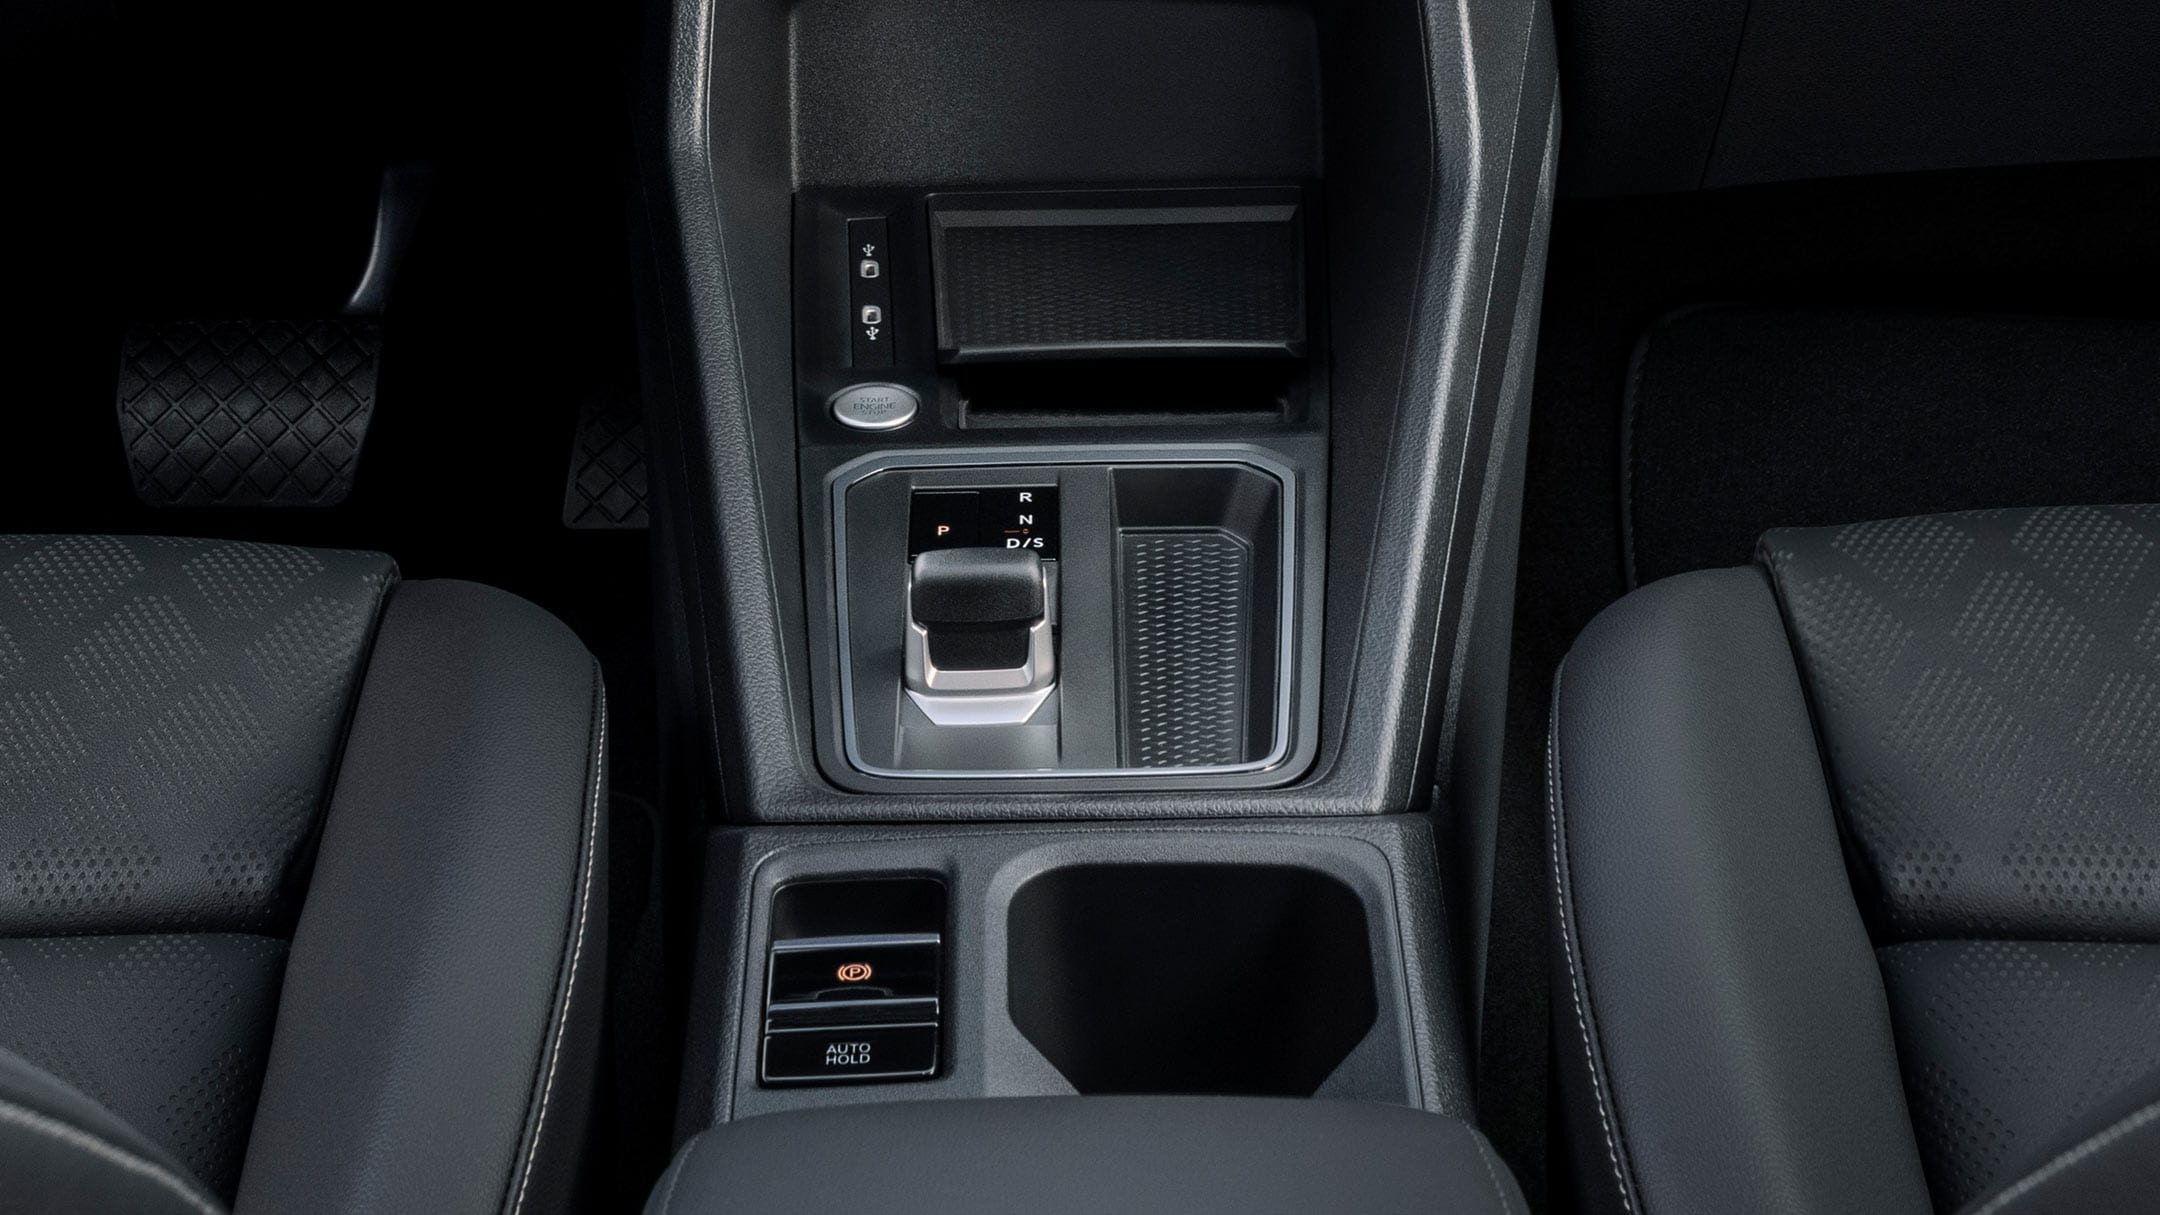 Interior photo showing the automatic transmission module